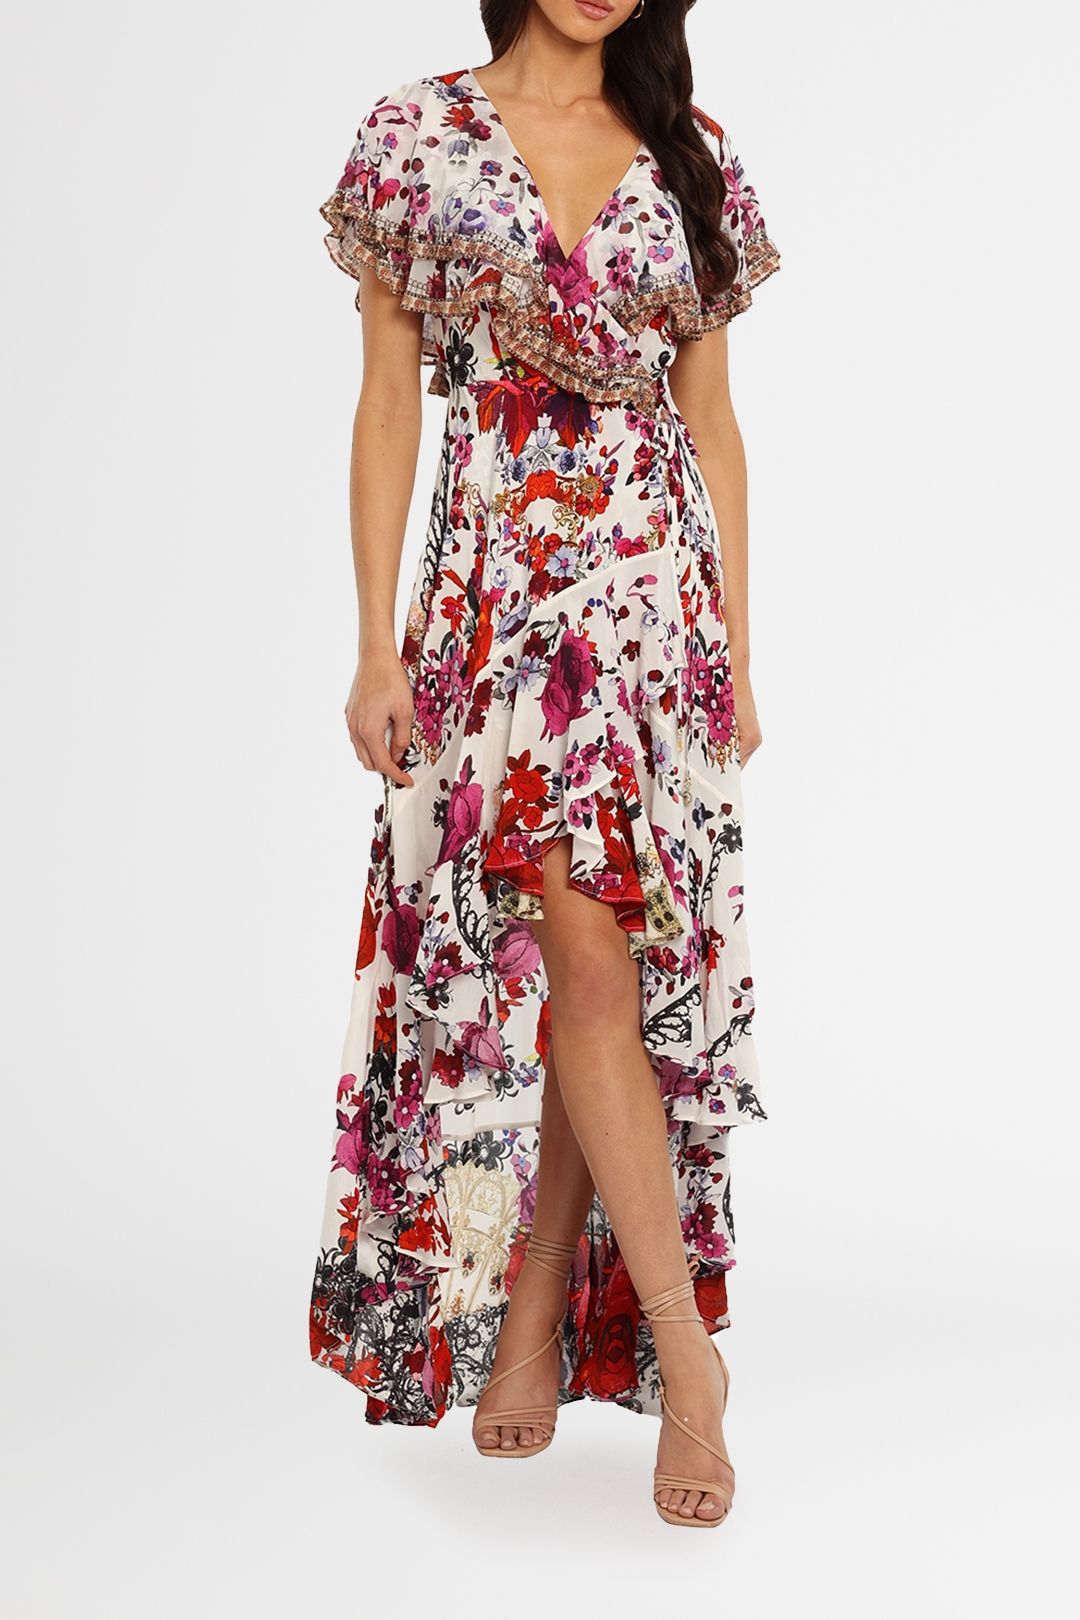 Camilla Reign Of Roses Tiered Midi Dress